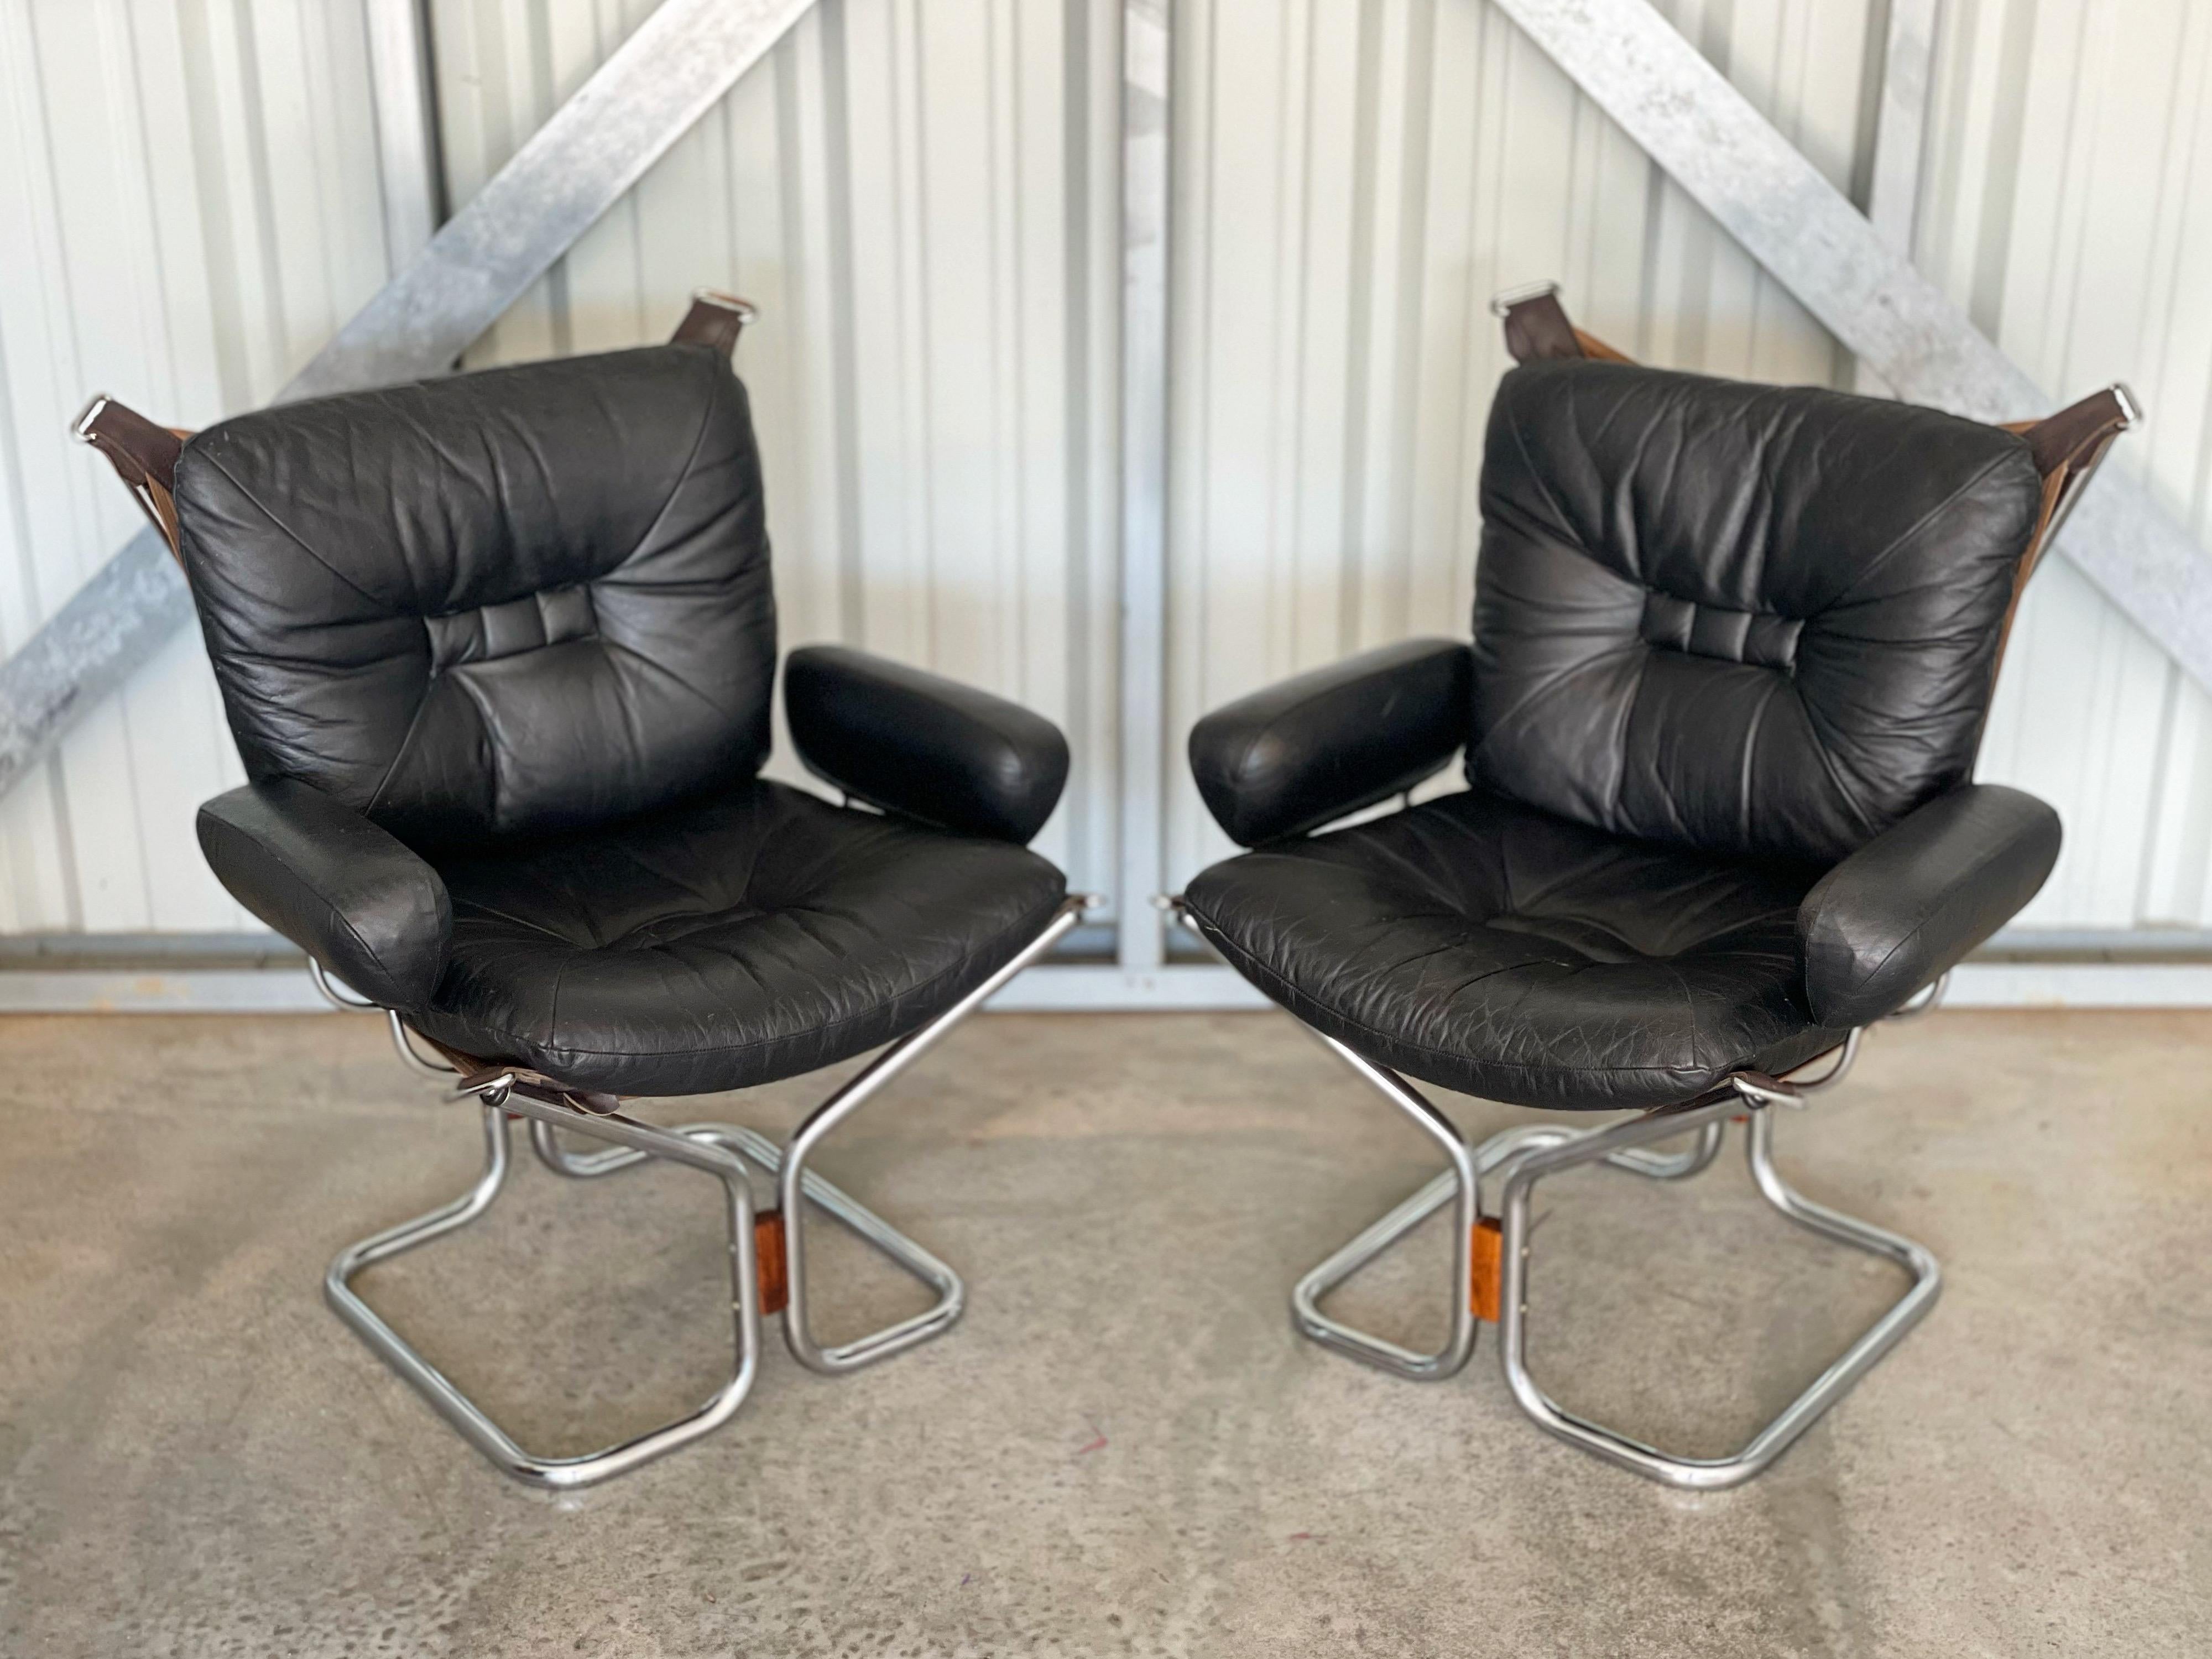 Scandinavian Modern Pair of Midcentury Chairs Black Leather and Chrome, Ingmar Relling for Westnofa